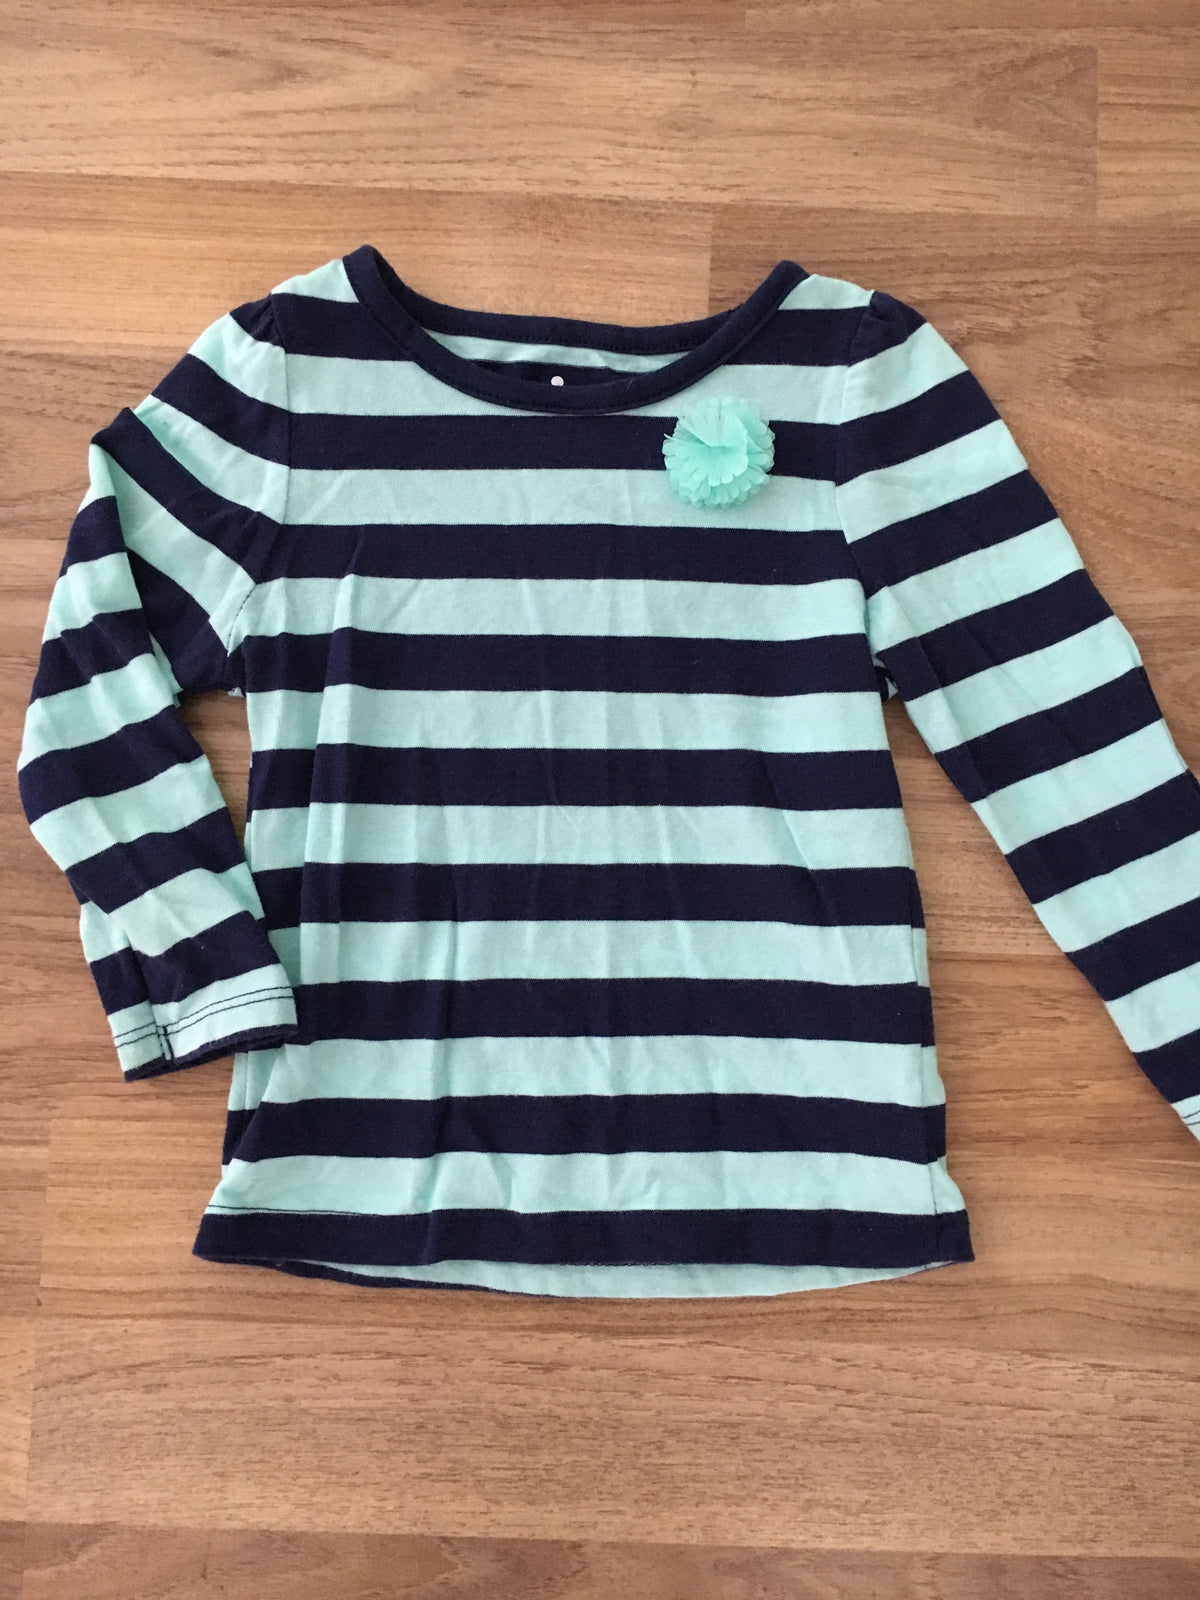 Long Sleeved Striped Top (Girls Size 18M)